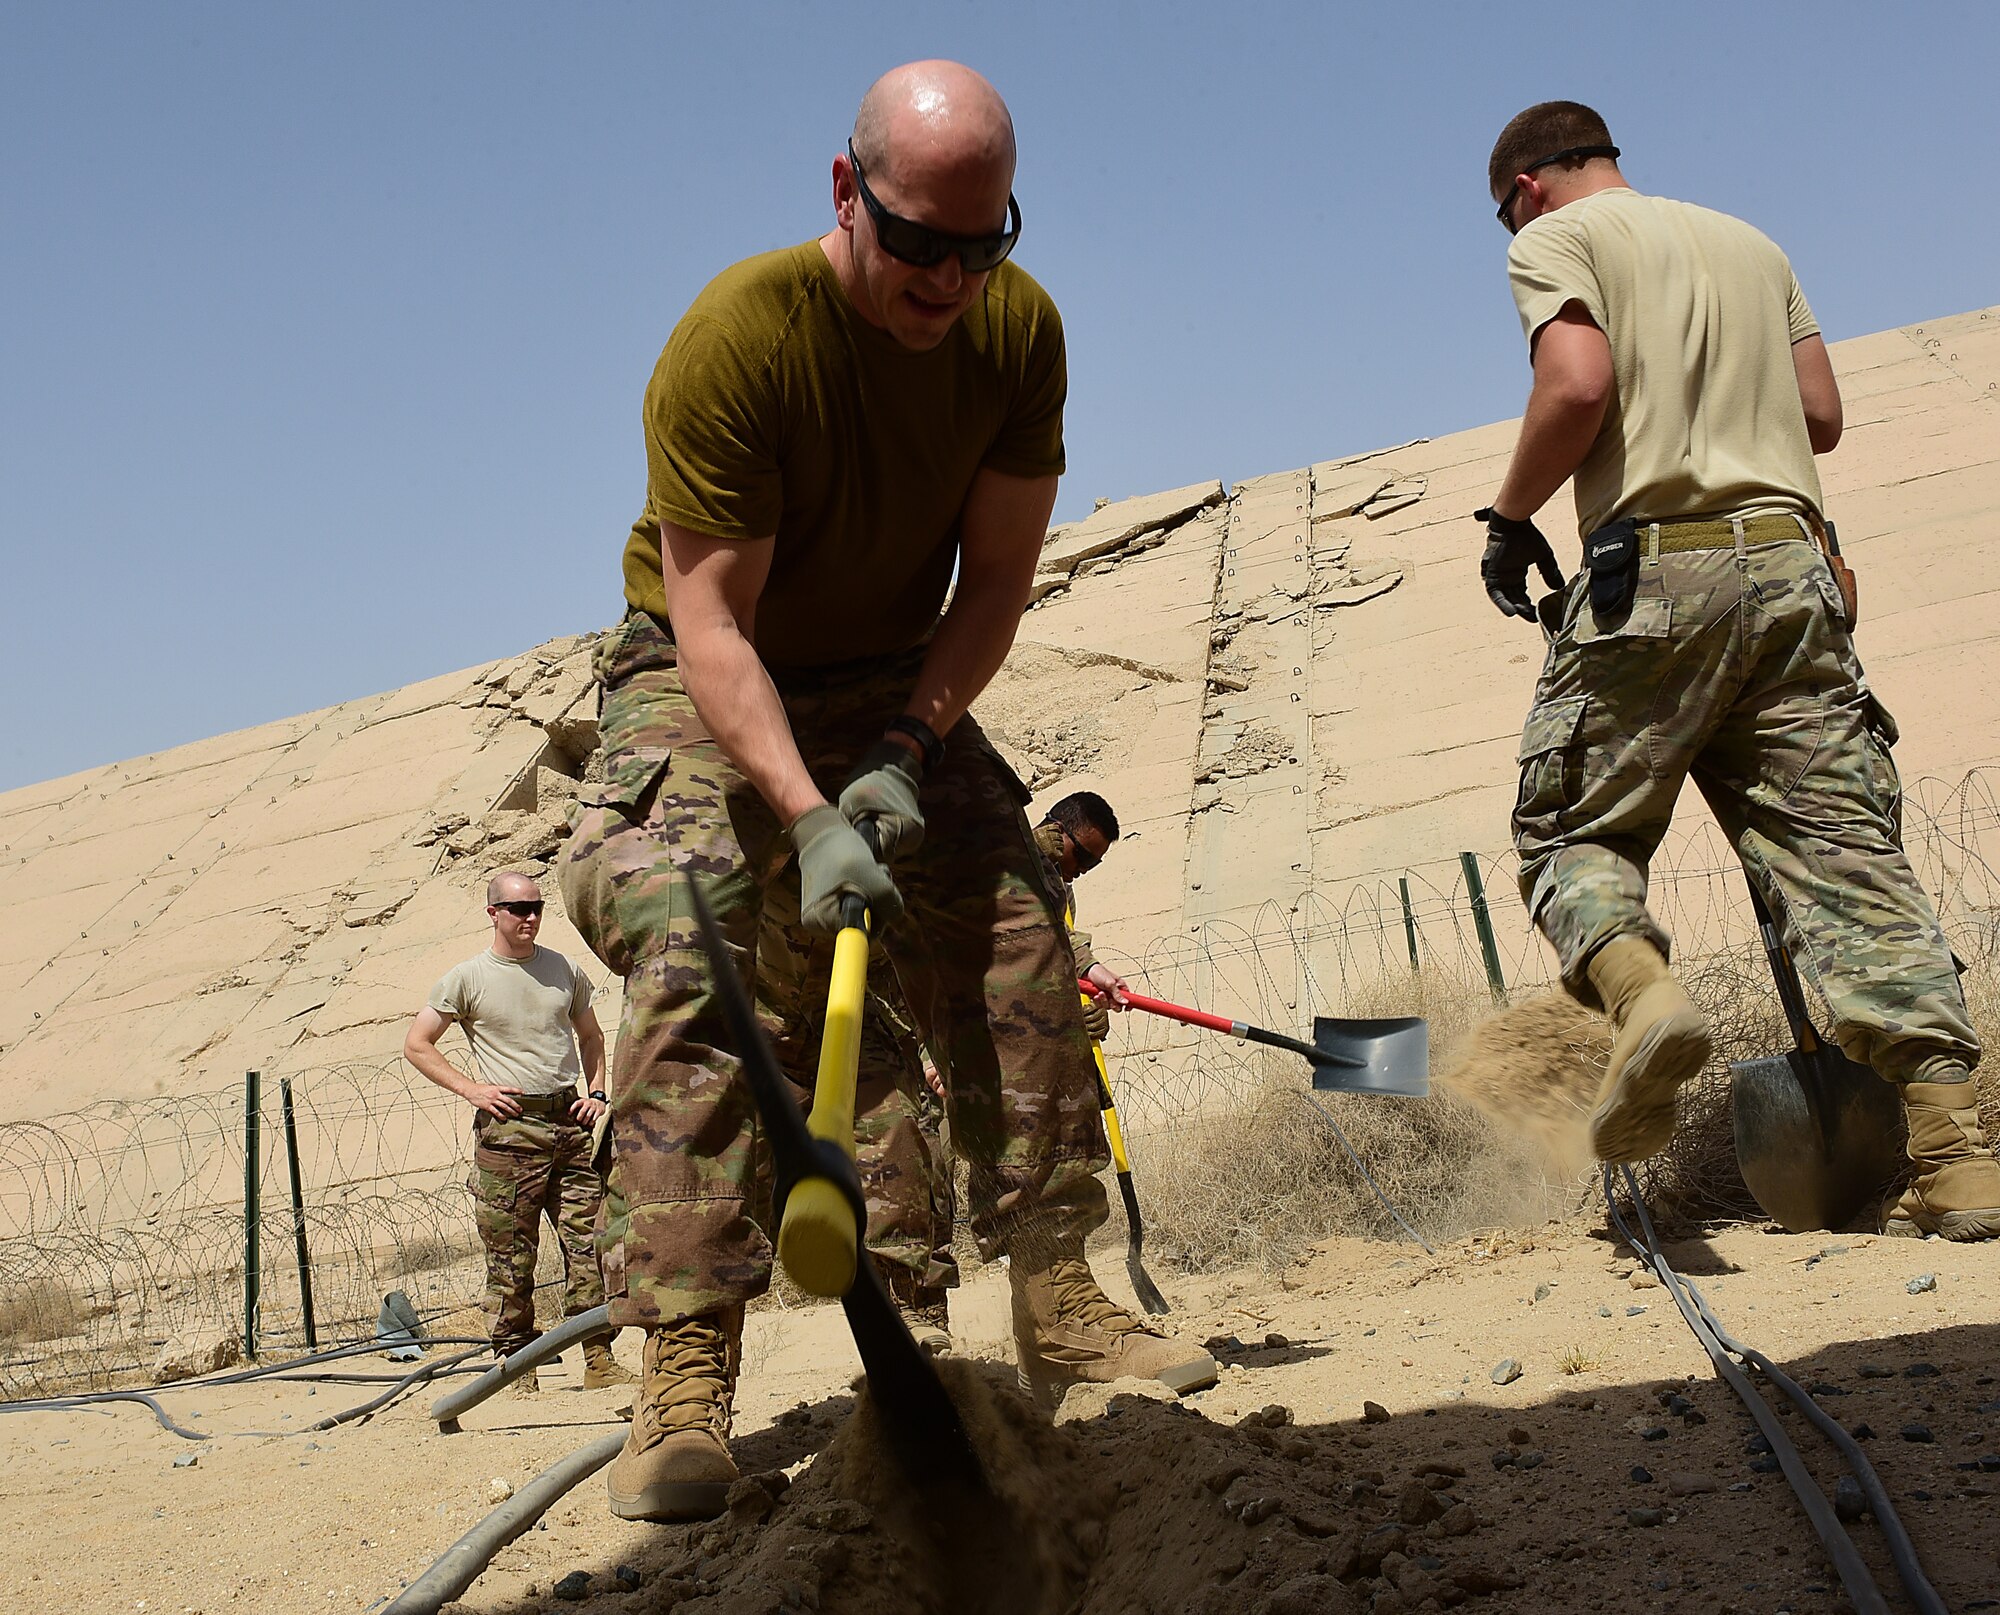 An Airman digs a hole in the sand with a pick axe